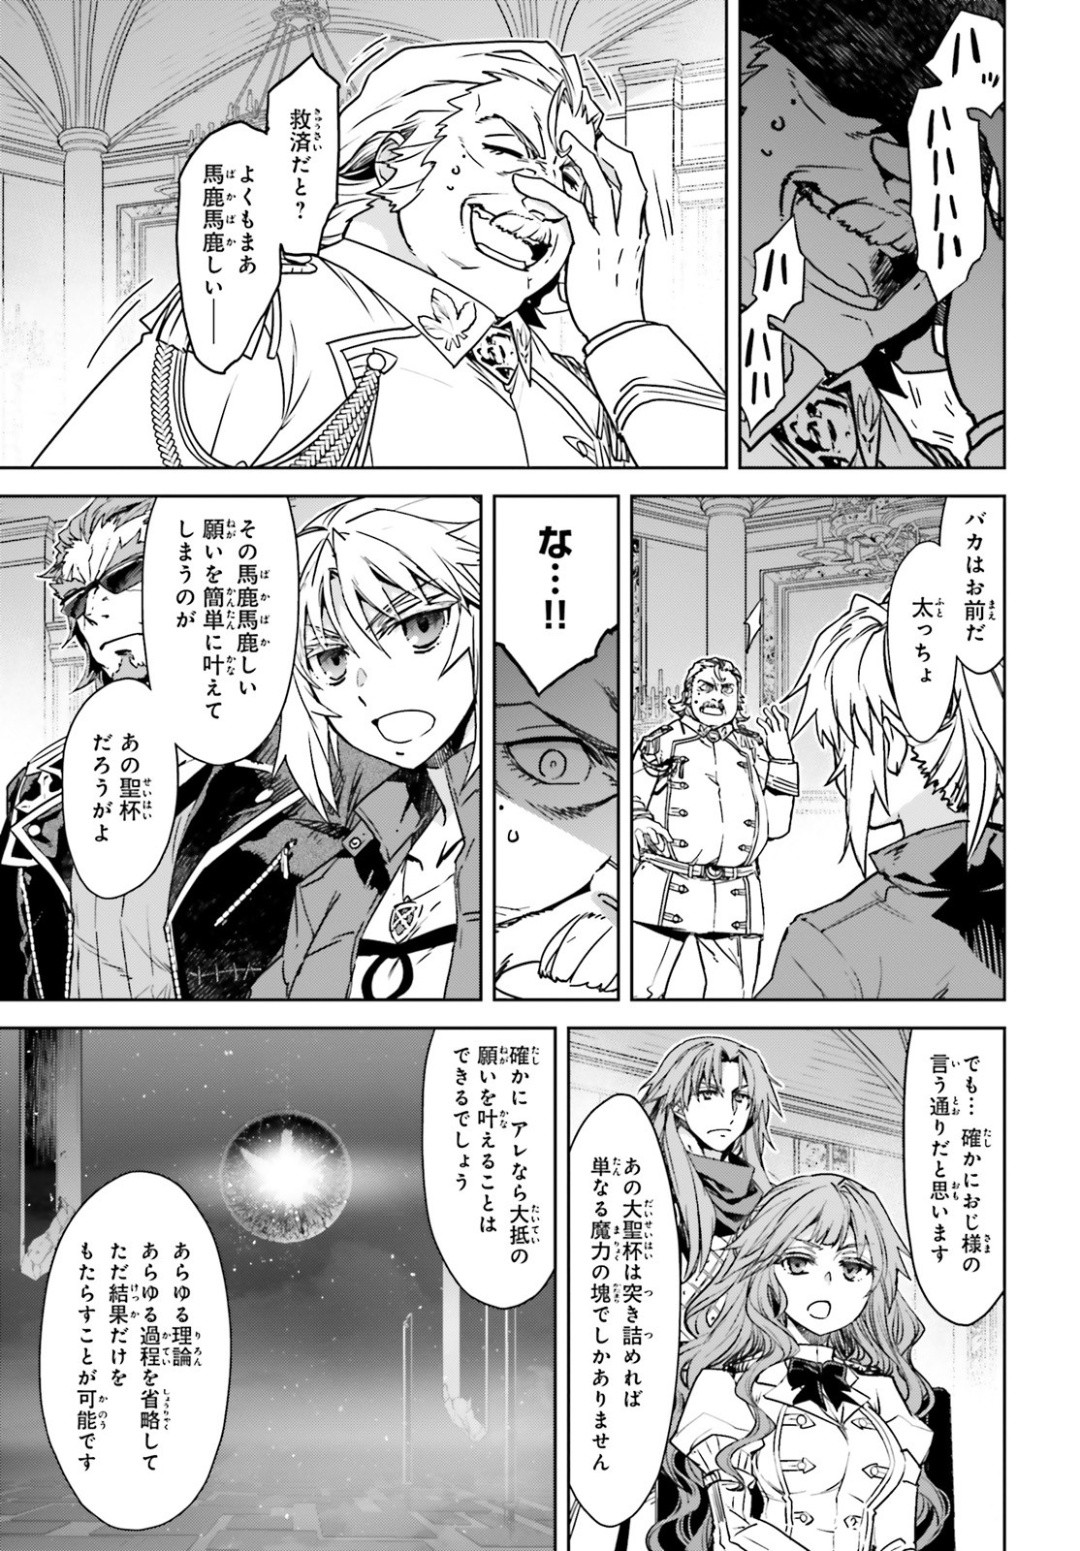 Fate-Apocrypha - Chapter 39 - Page 3